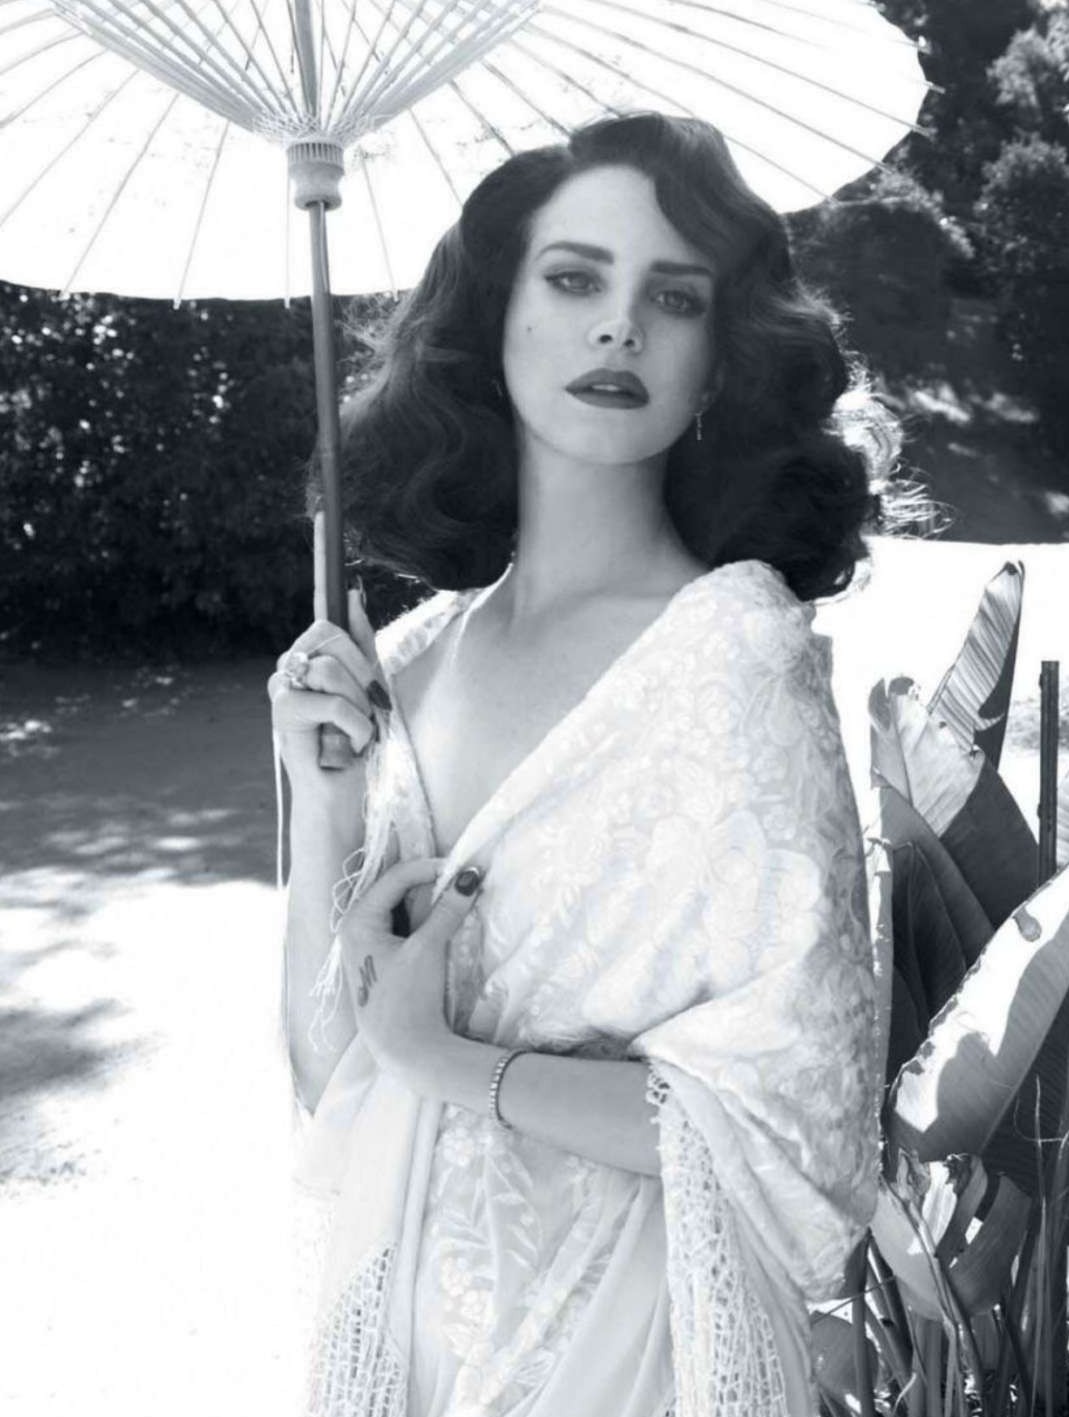 Lana Del Rey Hot and Spicy Cover Photos for L’Officiel Paris Magazine ...